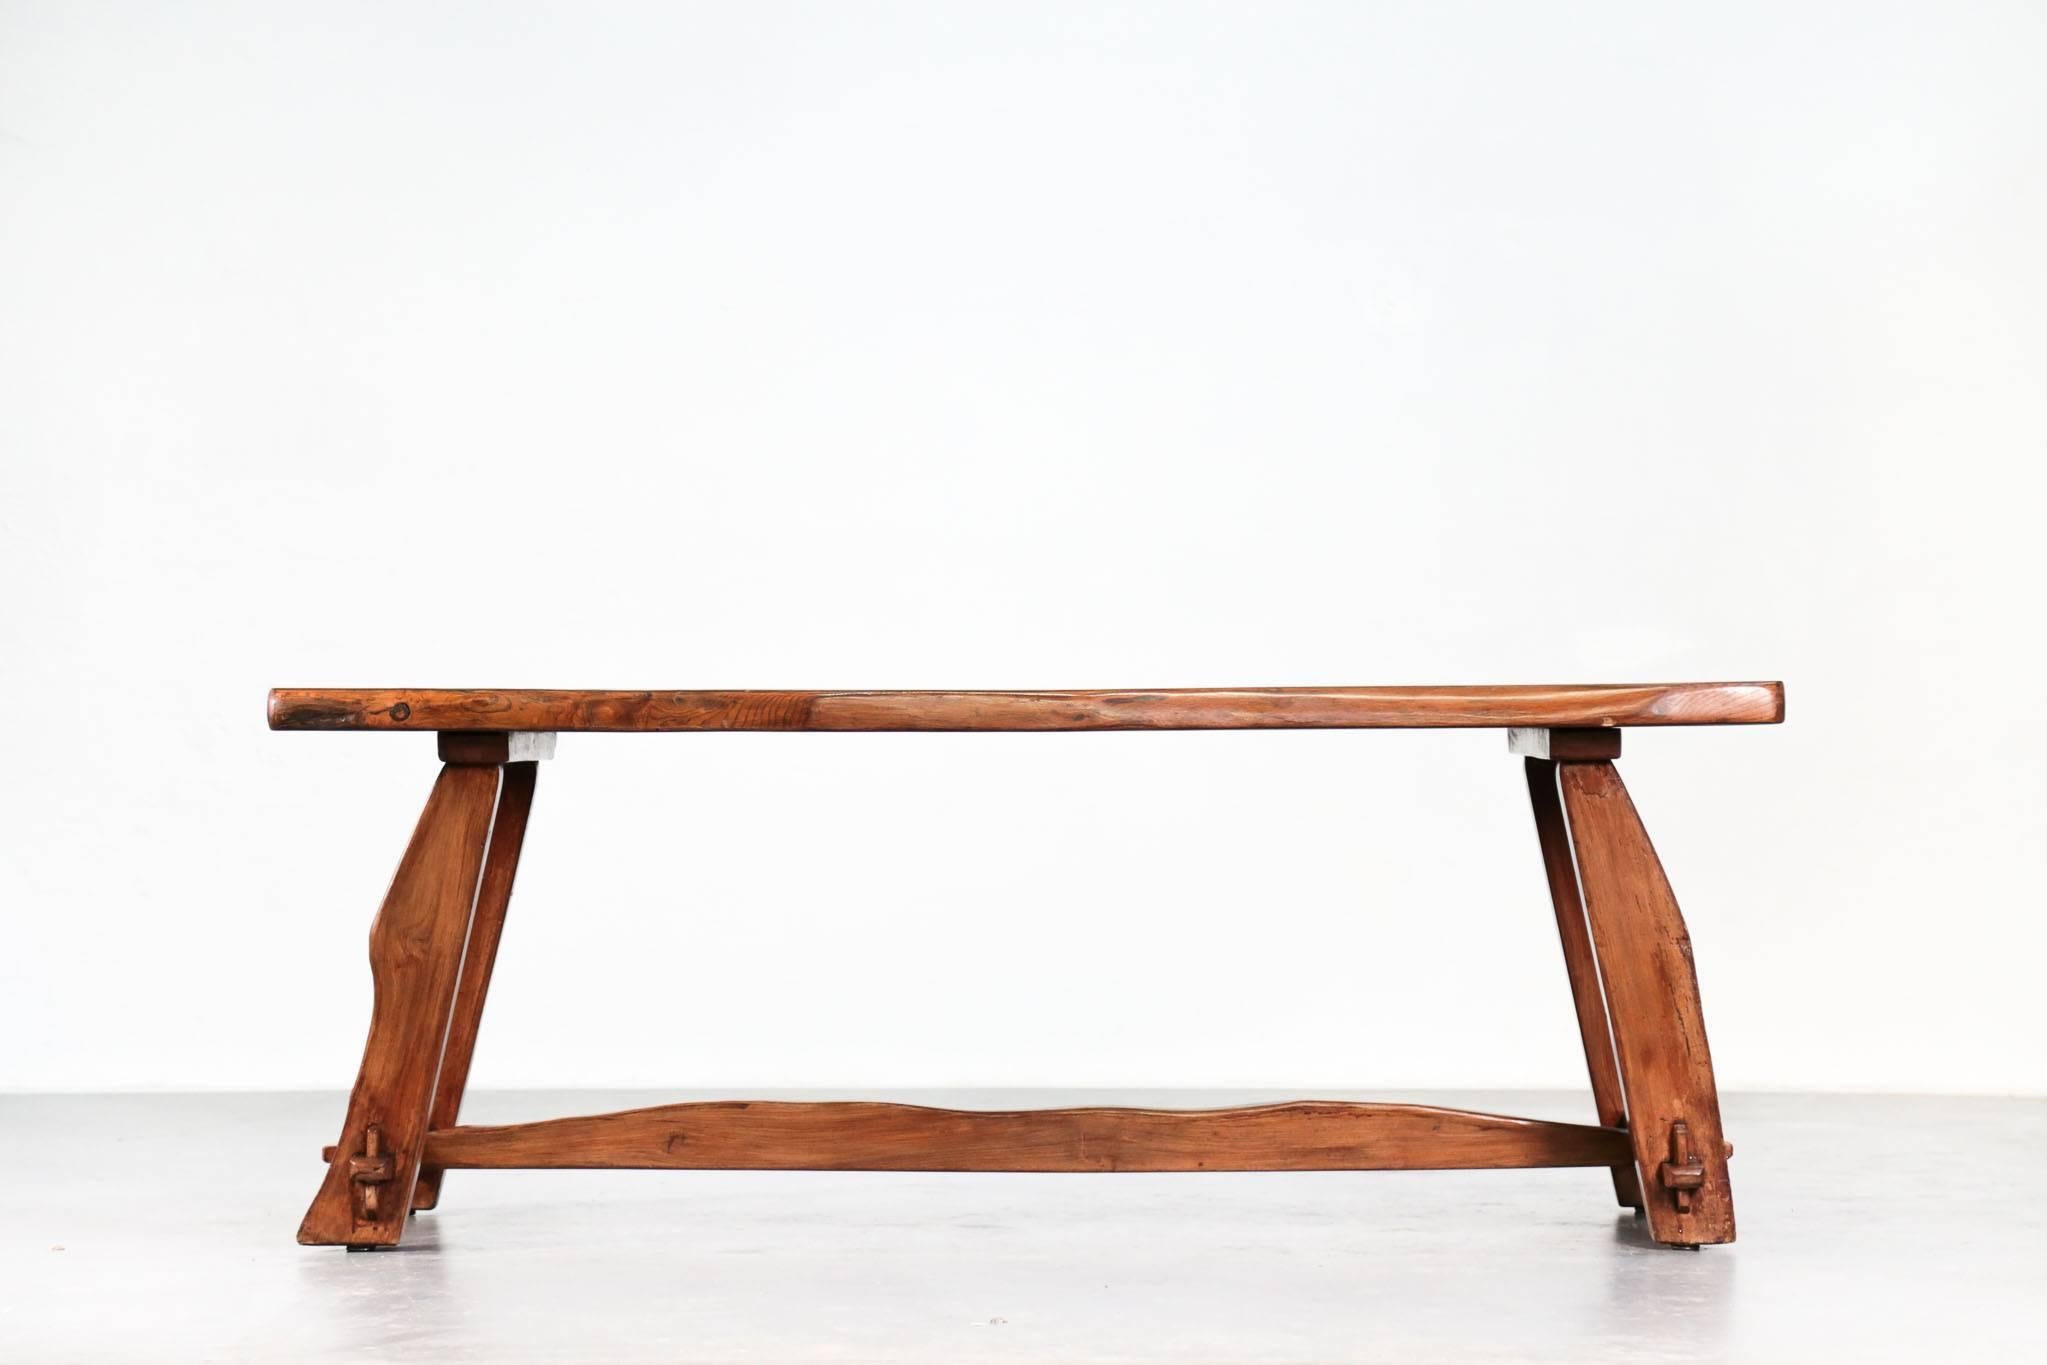 Elm Olavi Hanninen Dining Room Set, Table and Benches